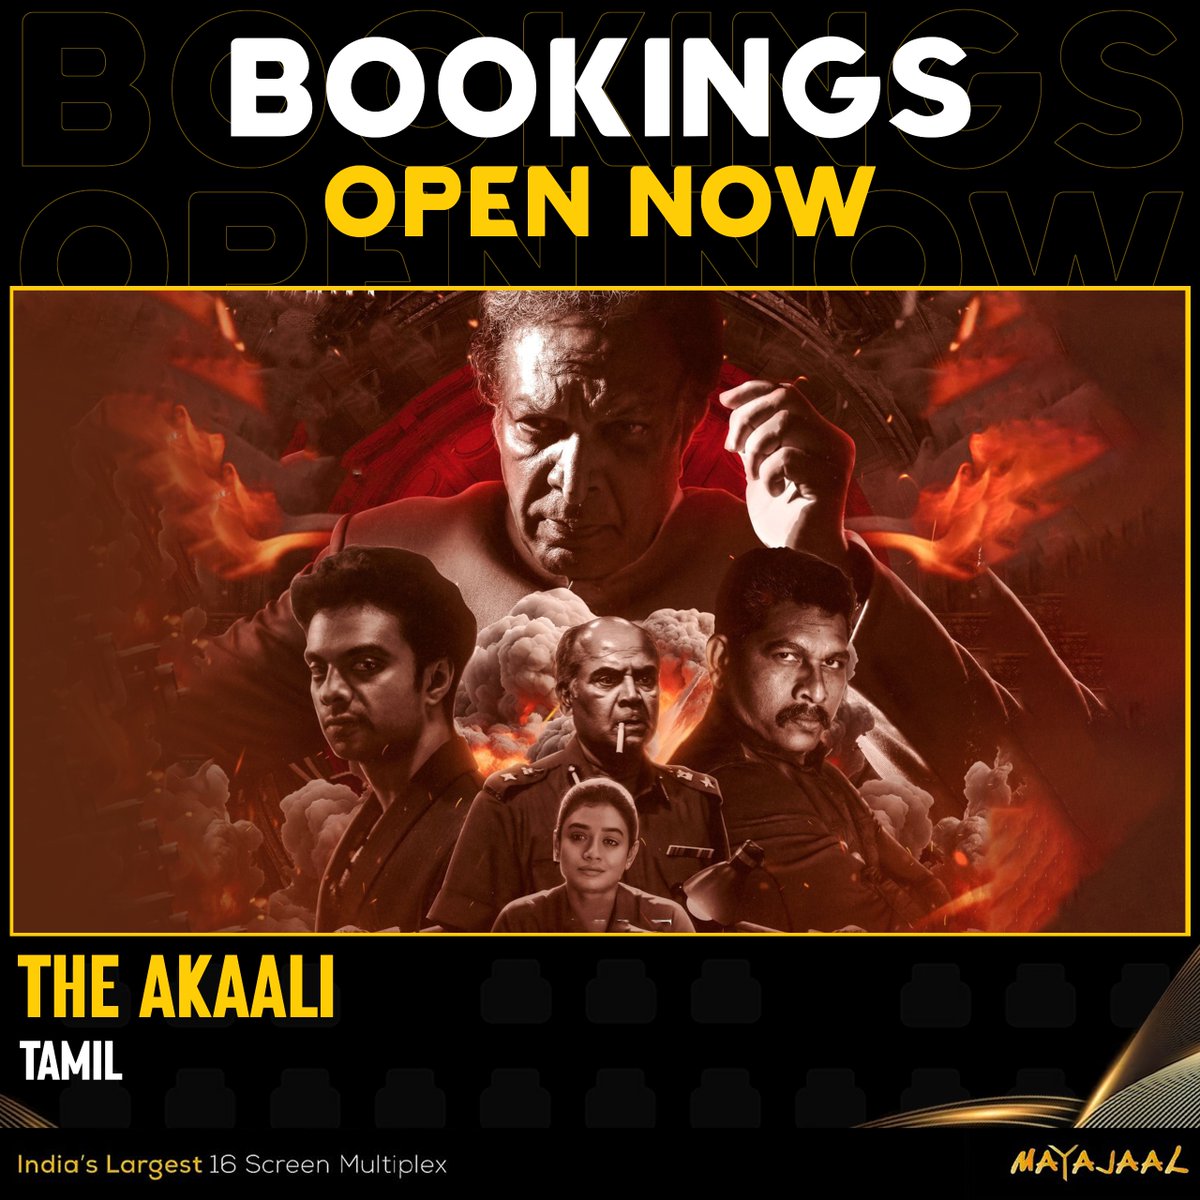 Get ready to enter into the world of darkness in #TheAkaali😈 Bookings open for #TheAkaali (Tamil) at #Mayajaal 🎟️bit.ly/3sVdbqD @Dir_MohamedAsif @actornasser